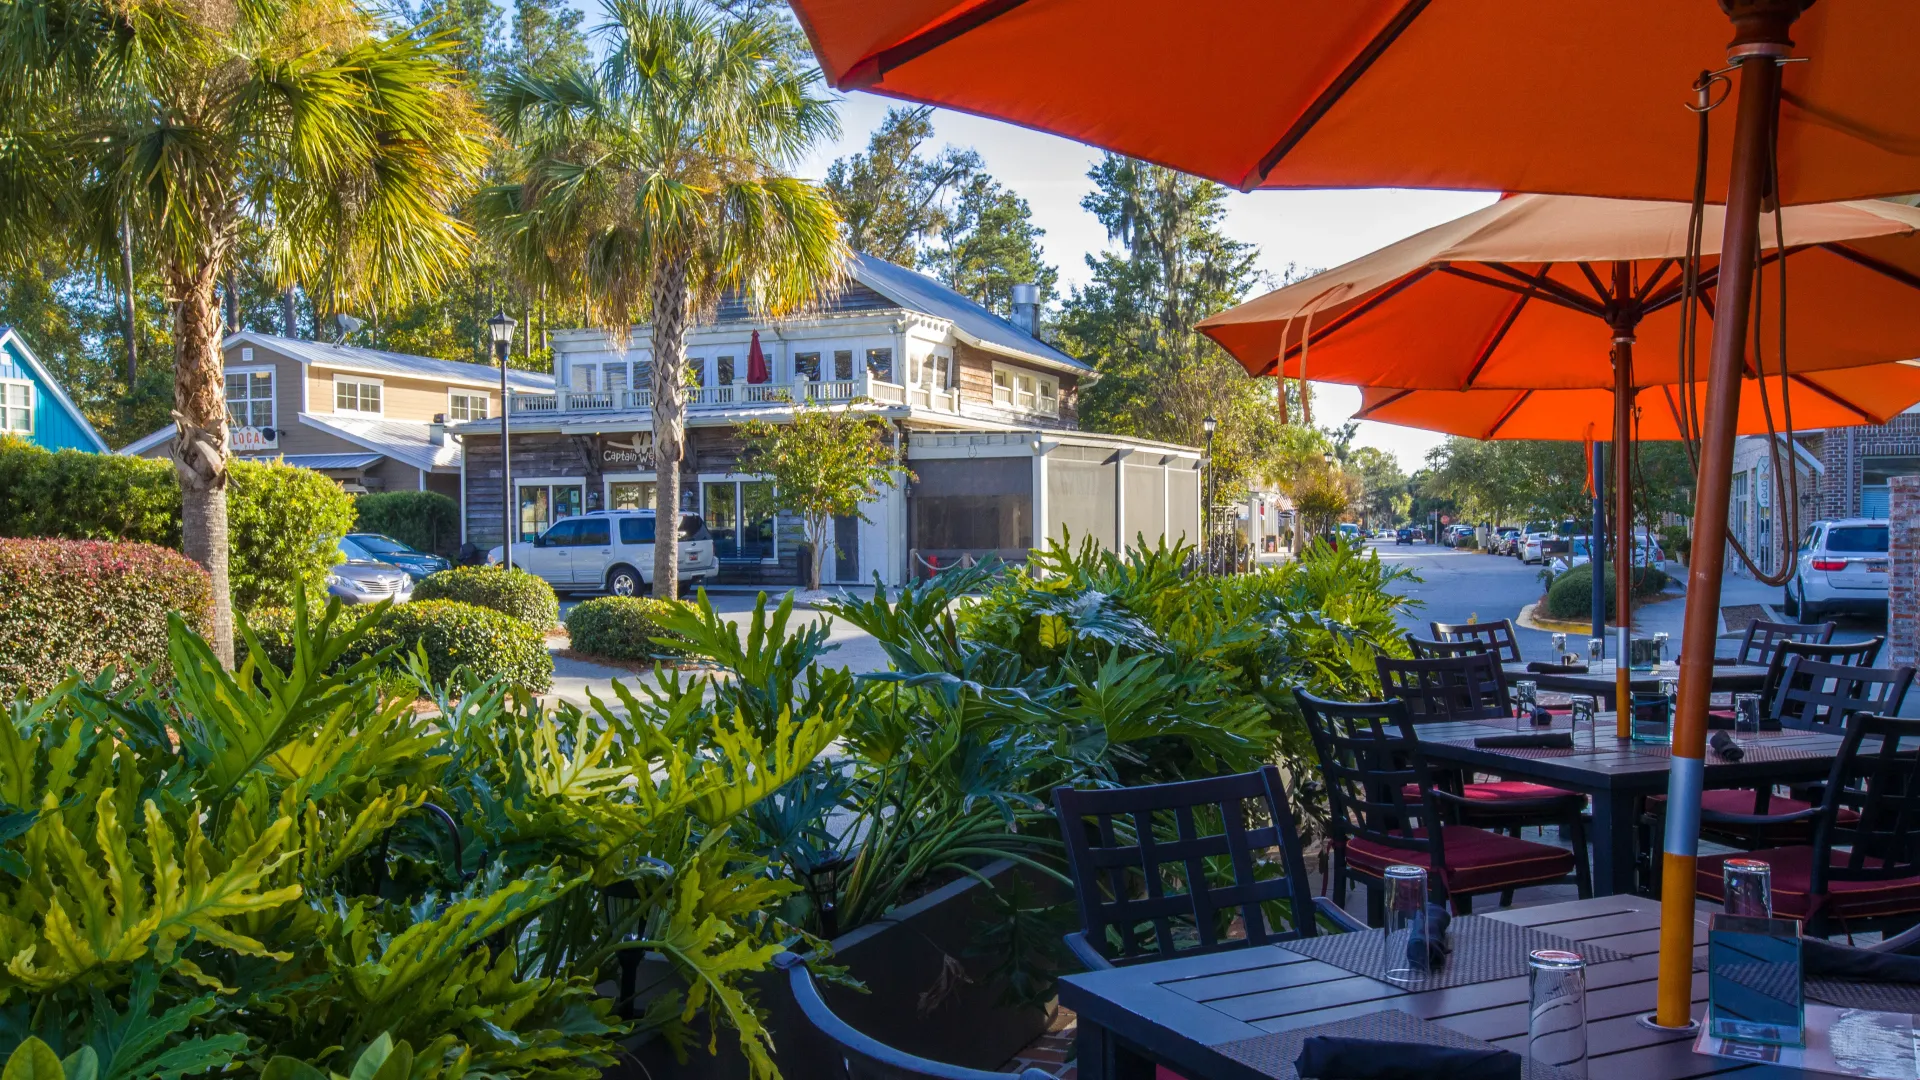 The Grays at Old Town is located just minutes away from Old Town Bluffton, where you will have access to plentiful dining and shopping. 